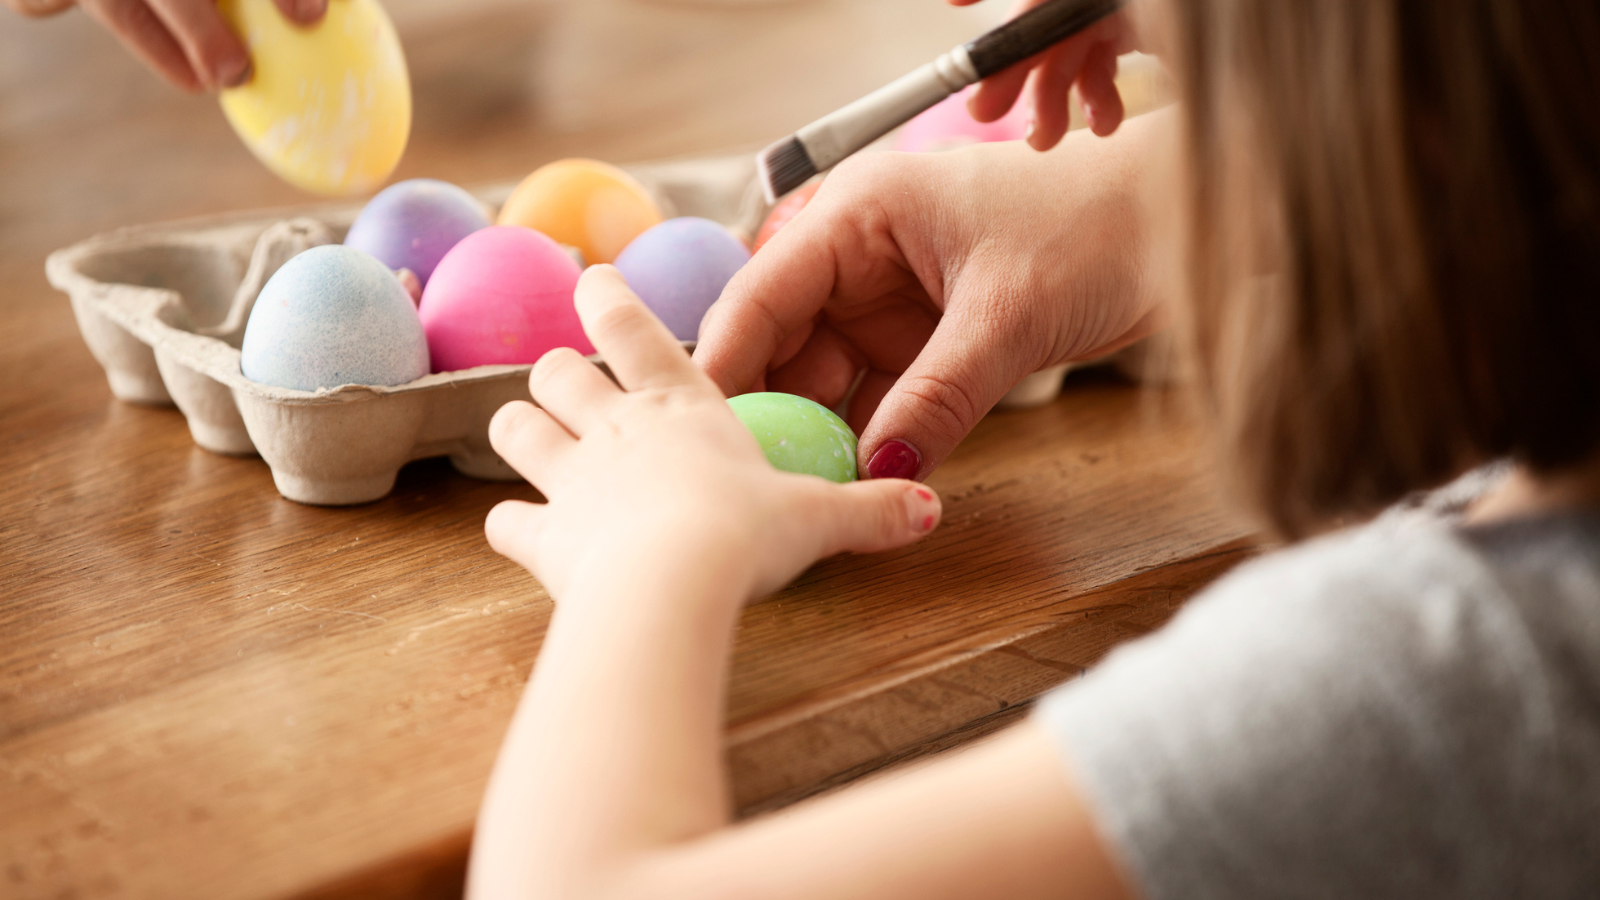 Child coloring an egg for Easter